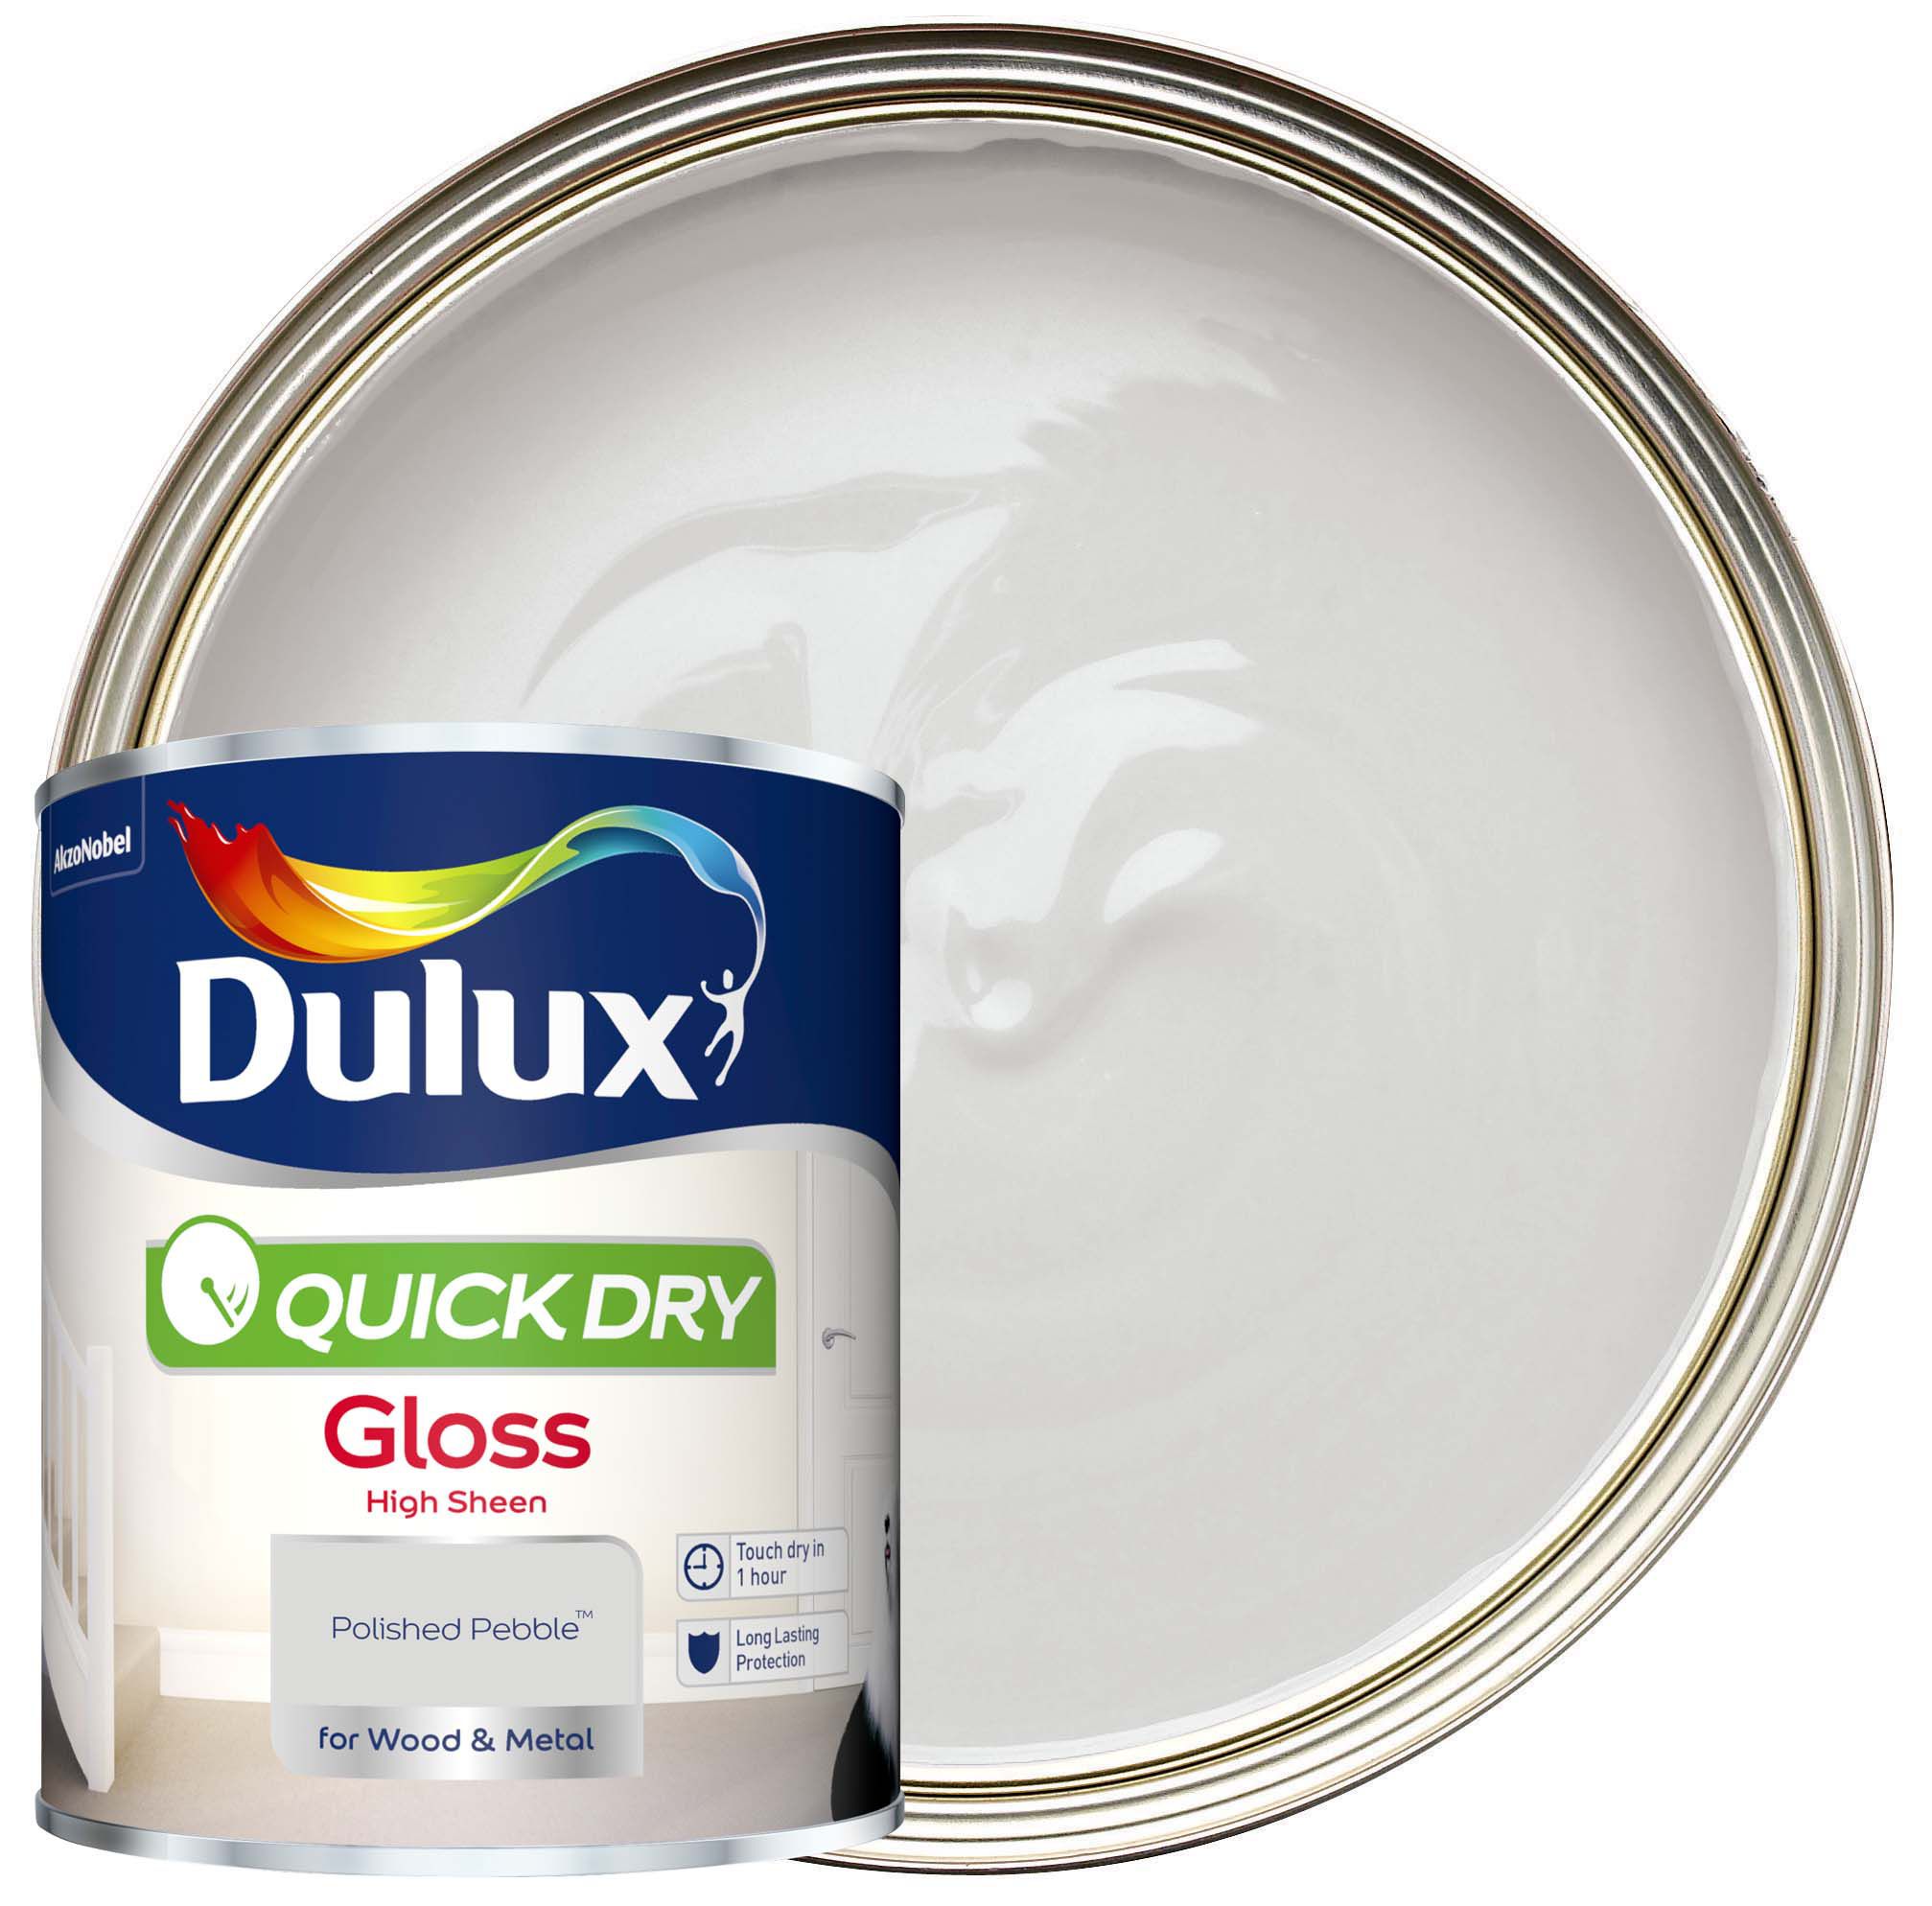 Image of Dulux Quick Dry Gloss Paint - Polished Pebble Paint - 750ml